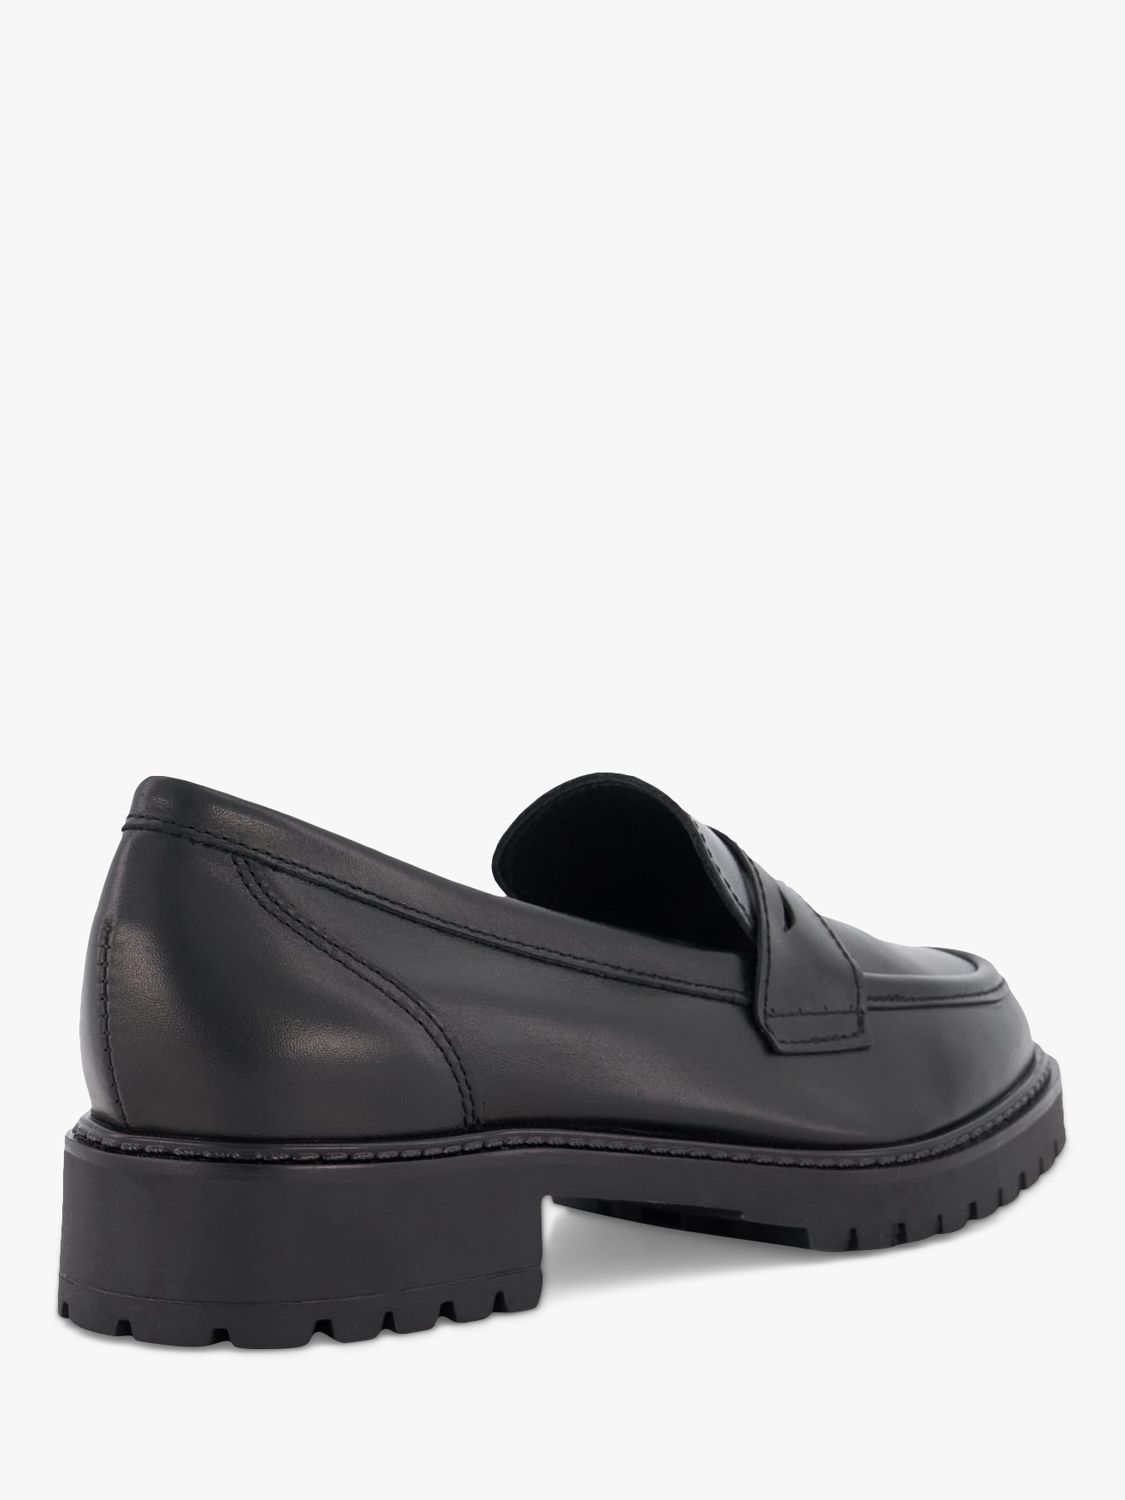 Buy Dune Gild Leather Cleated Penny Loafer Online at johnlewis.com